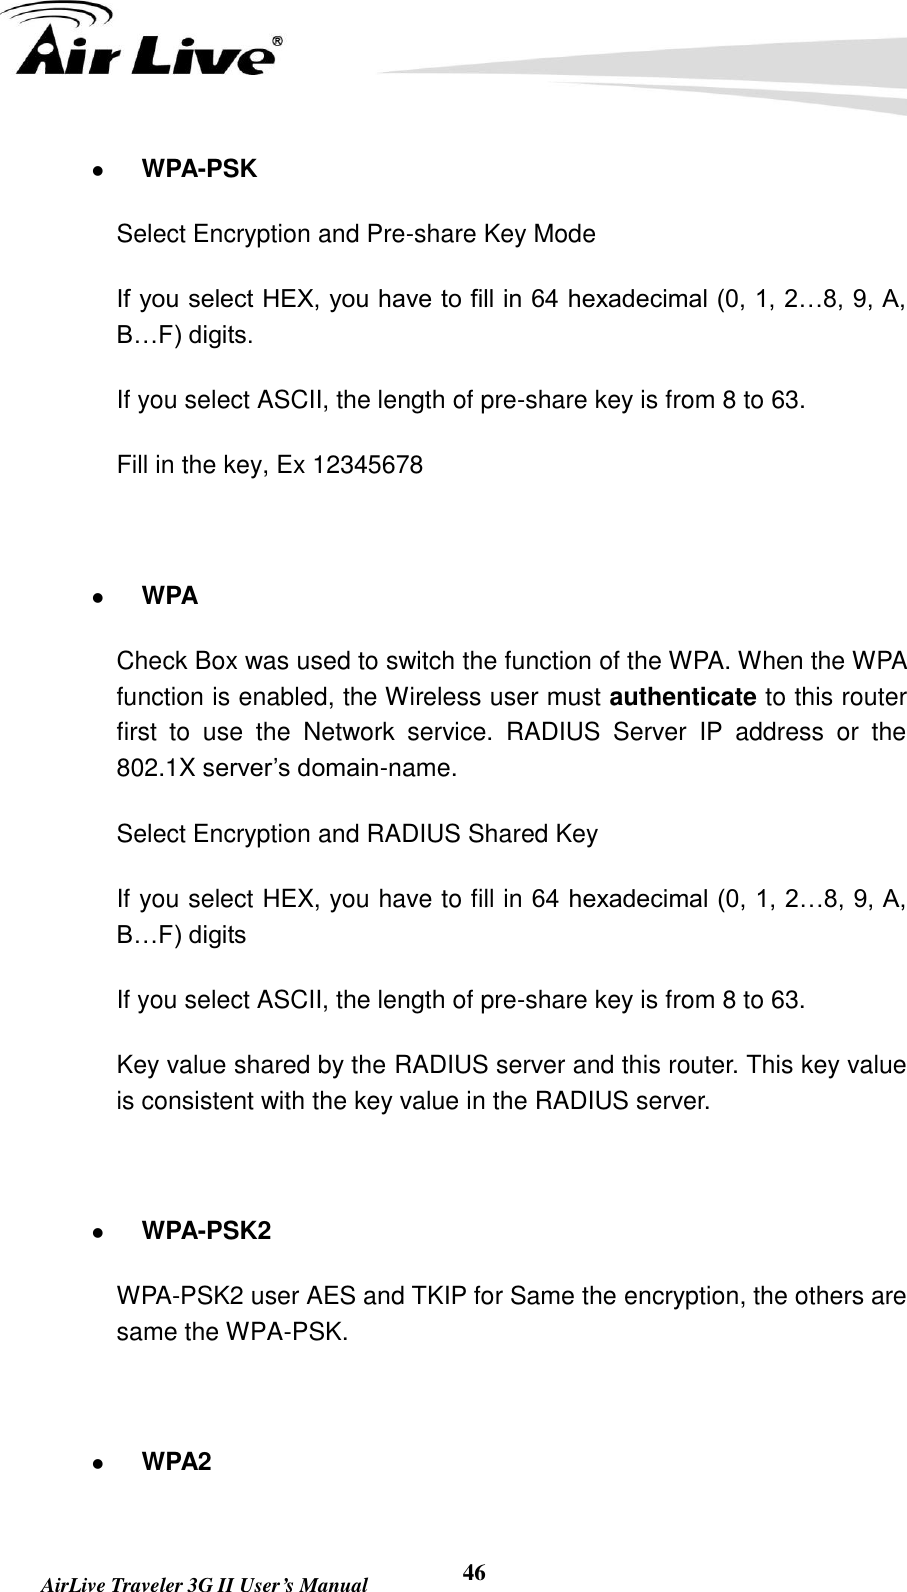   AirLive Traveler 3G II User’s Manual 46  WPA-PSK Select Encryption and Pre-share Key Mode If you select HEX, you have to fill in 64 hexadecimal (0, 1, 2…8, 9, A, B…F) digits. If you select ASCII, the length of pre-share key is from 8 to 63. Fill in the key, Ex 12345678   WPA Check Box was used to switch the function of the WPA. When the WPA function is enabled, the Wireless user must authenticate to this router first  to  use  the  Network  service.  RADIUS  Server  IP  address  or  the 802.1X server’s domain-name.   Select Encryption and RADIUS Shared Key If you select HEX, you have to fill in 64 hexadecimal (0, 1, 2…8, 9, A, B…F) digits If you select ASCII, the length of pre-share key is from 8 to 63. Key value shared by the RADIUS server and this router. This key value is consistent with the key value in the RADIUS server.   WPA-PSK2 WPA-PSK2 user AES and TKIP for Same the encryption, the others are same the WPA-PSK.   WPA2 